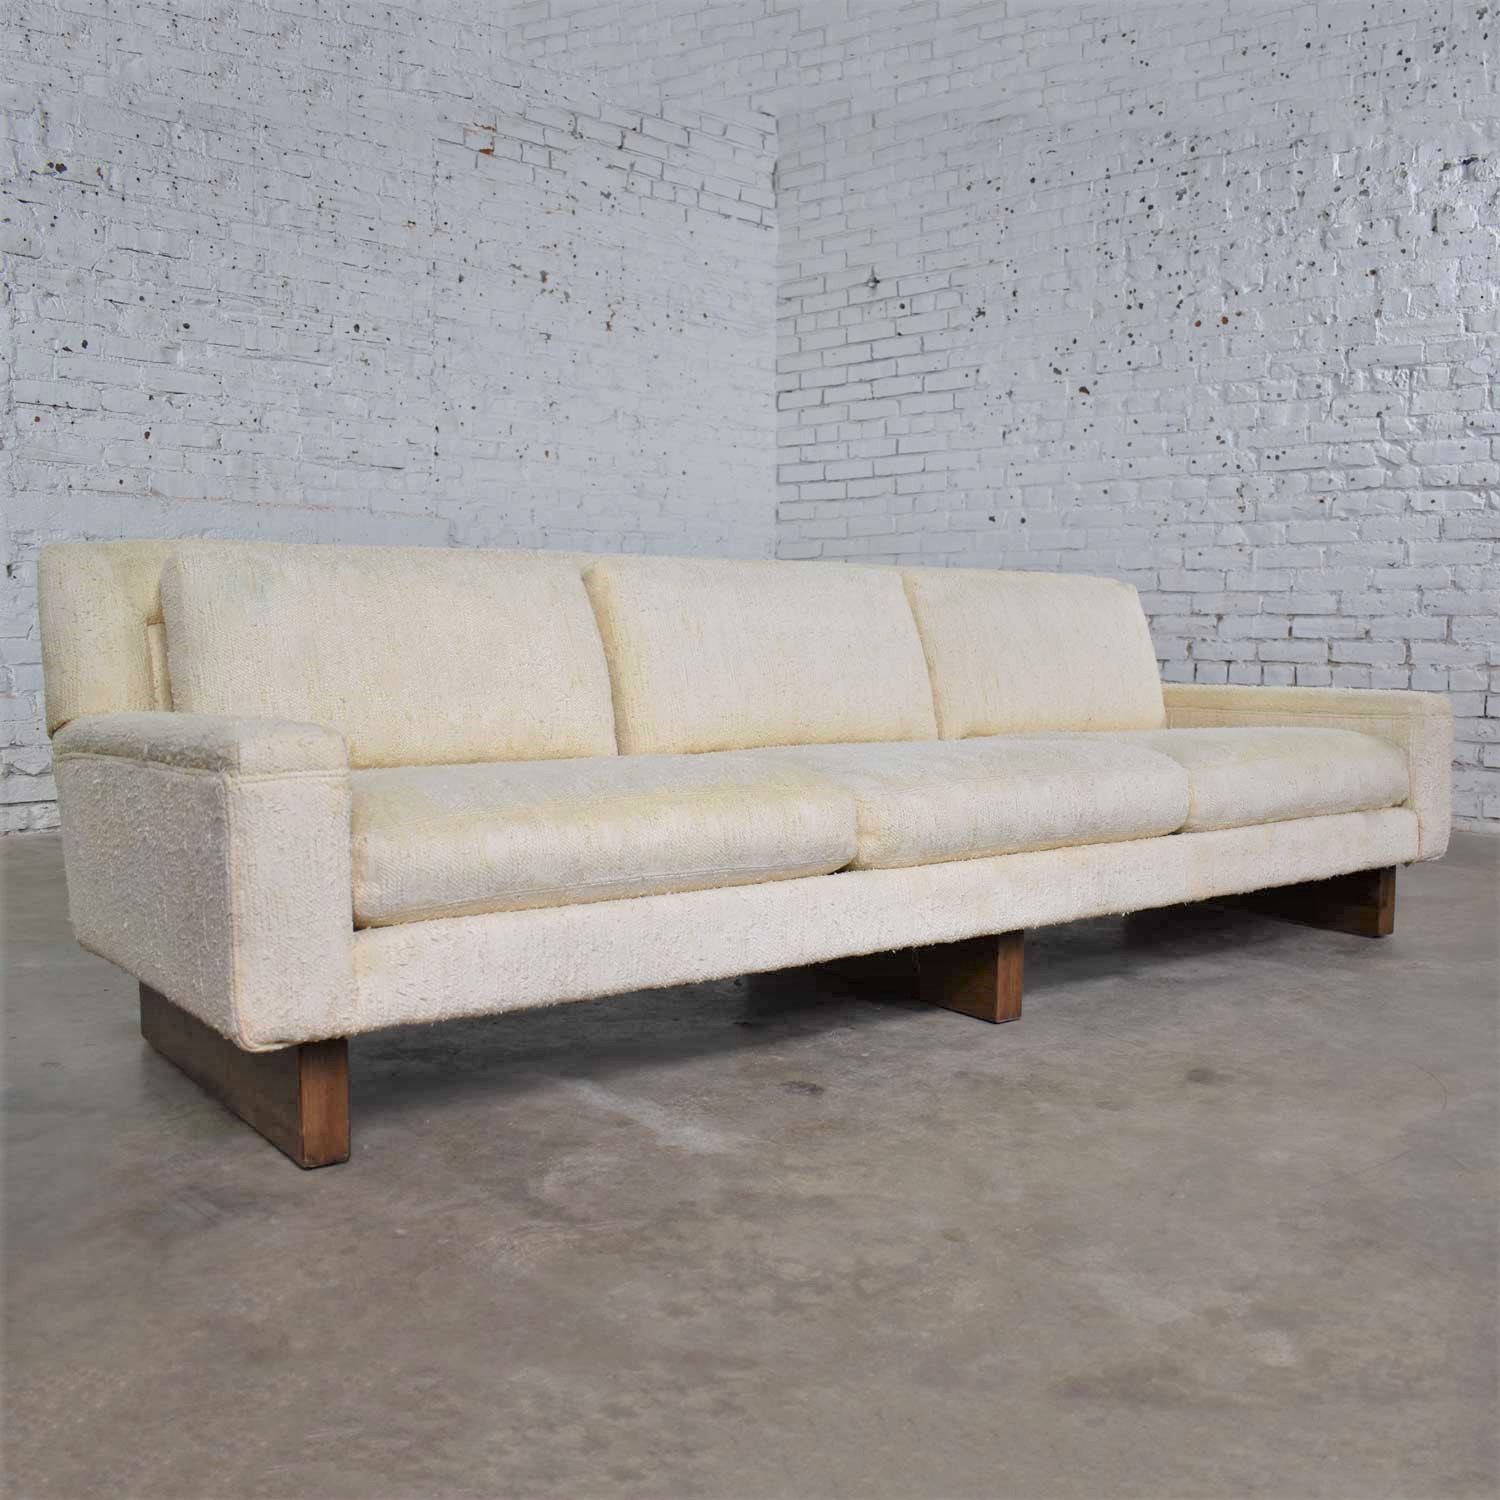 Vintage Mid Century Modern Lawson Style White Sofa by Flair Division for Bernhardt